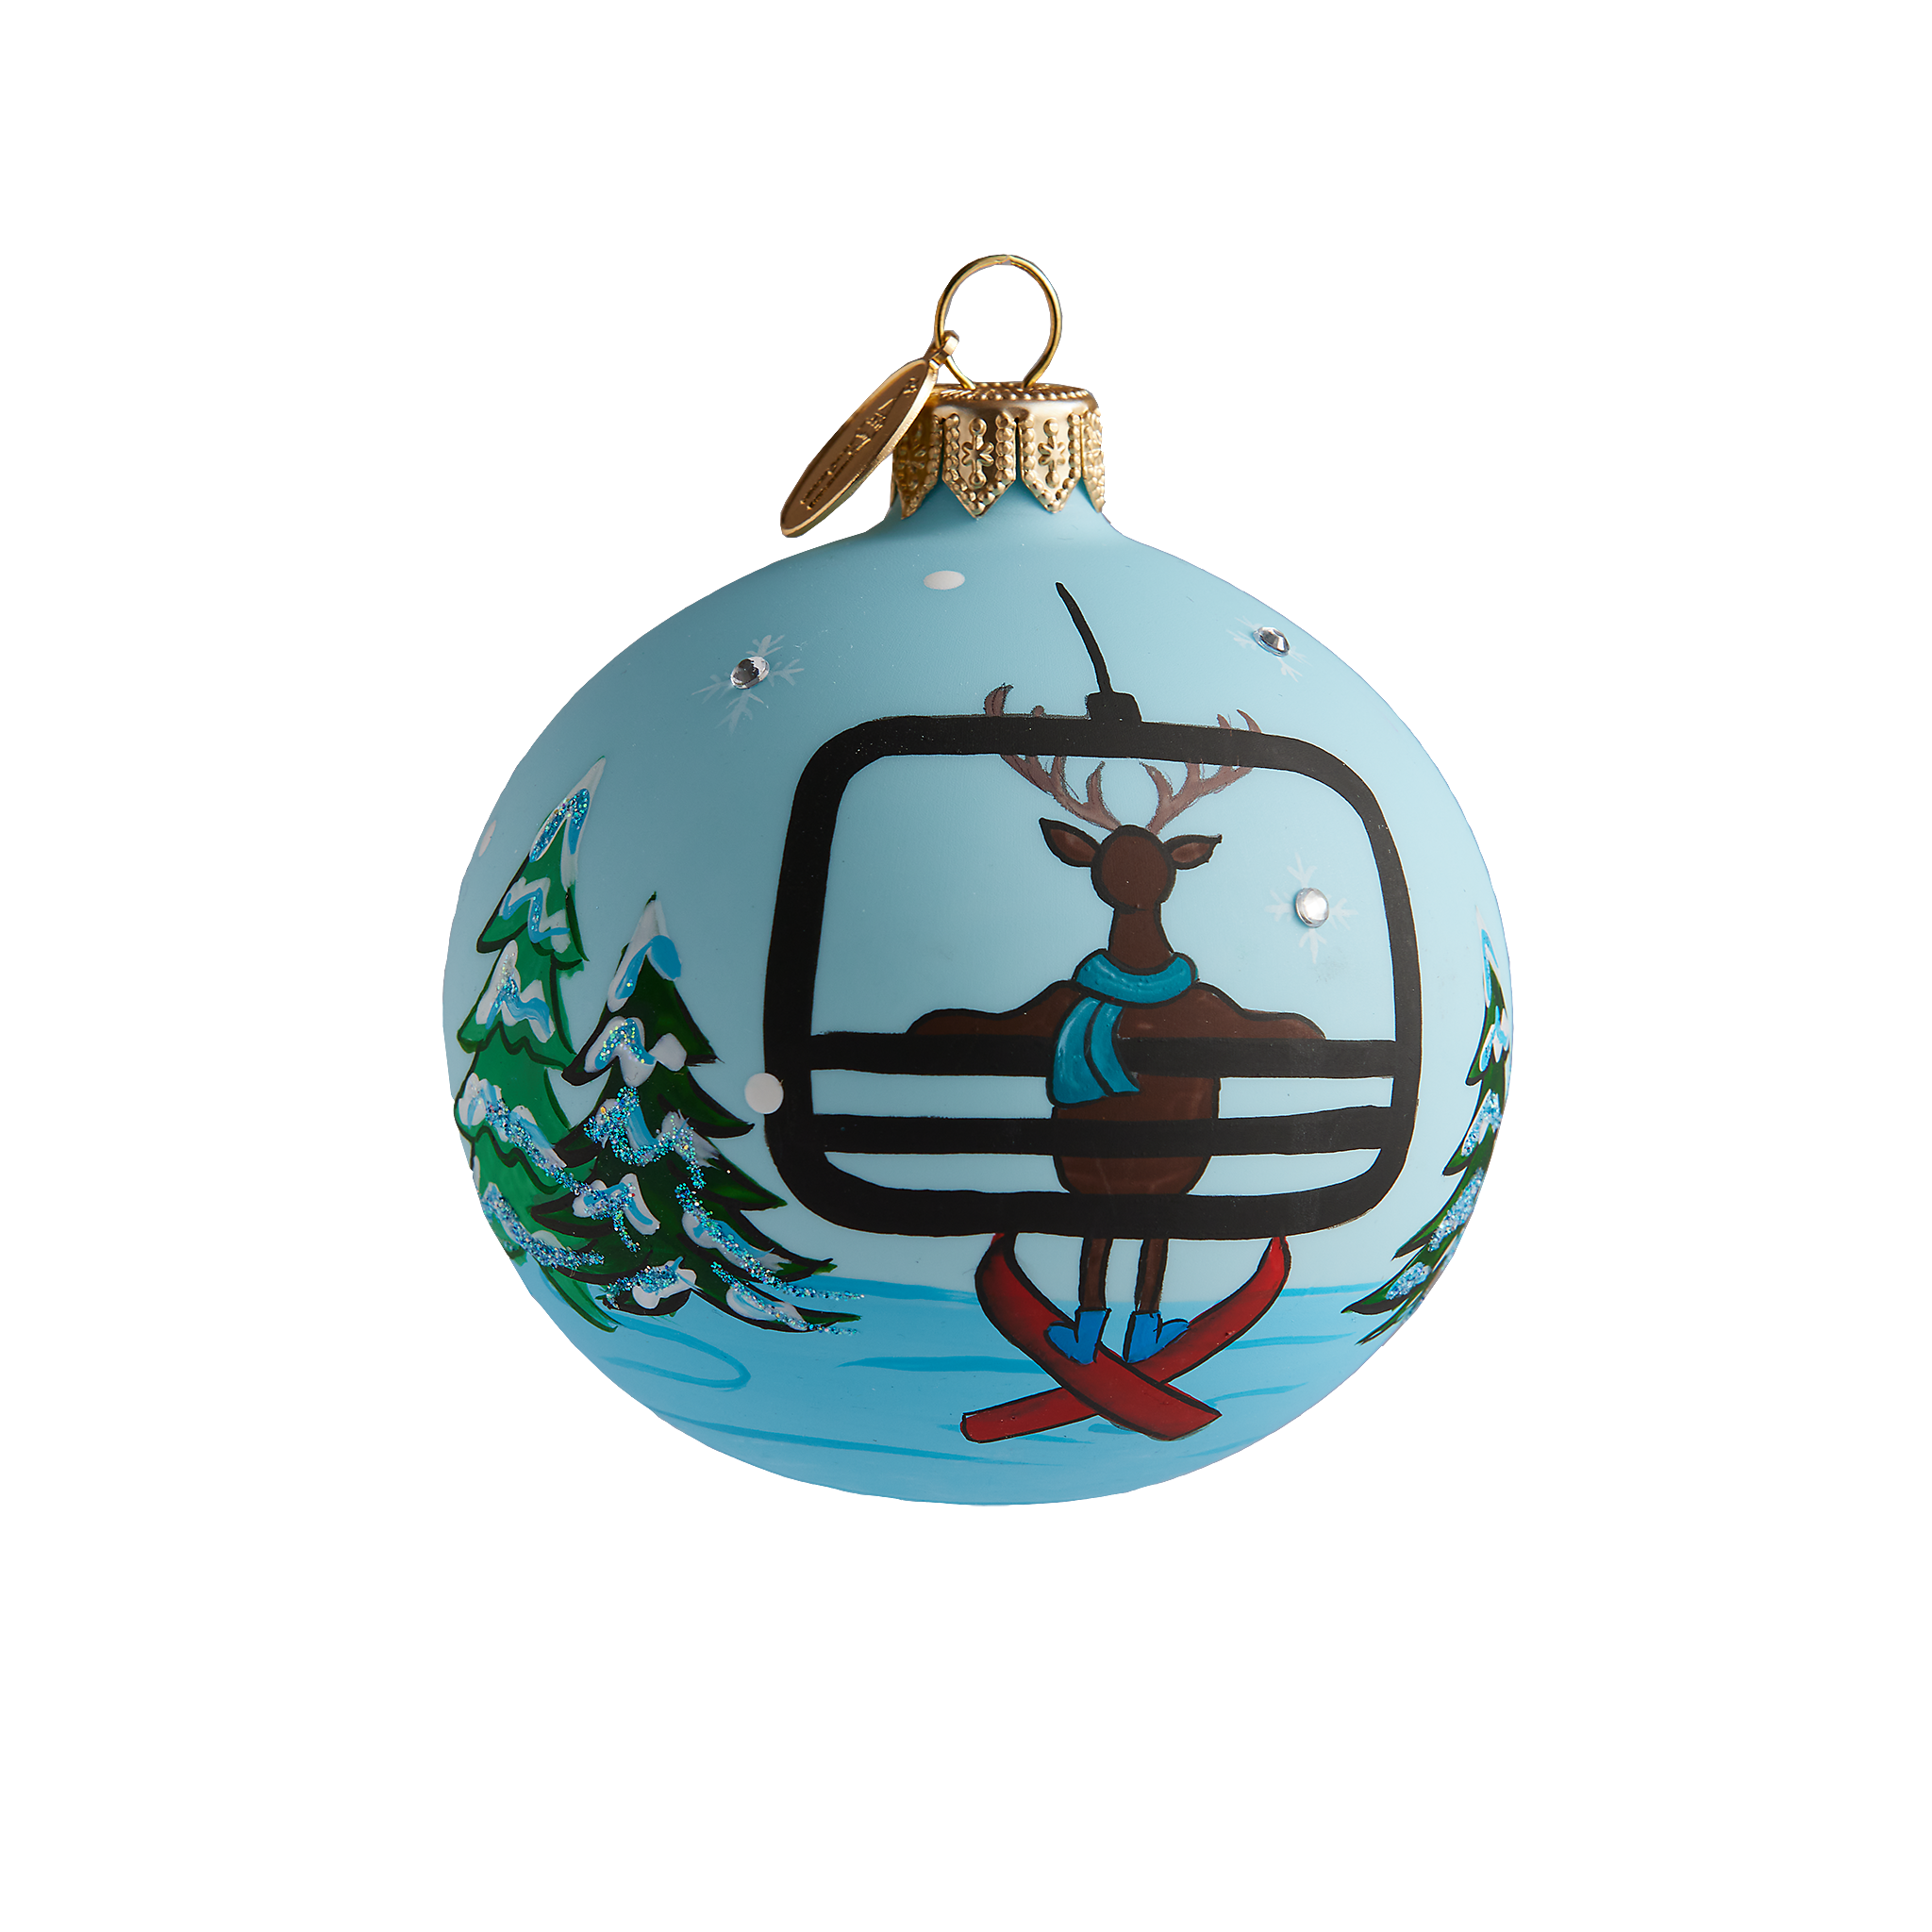 handmade ornament of bucky the deer on a chairlift 